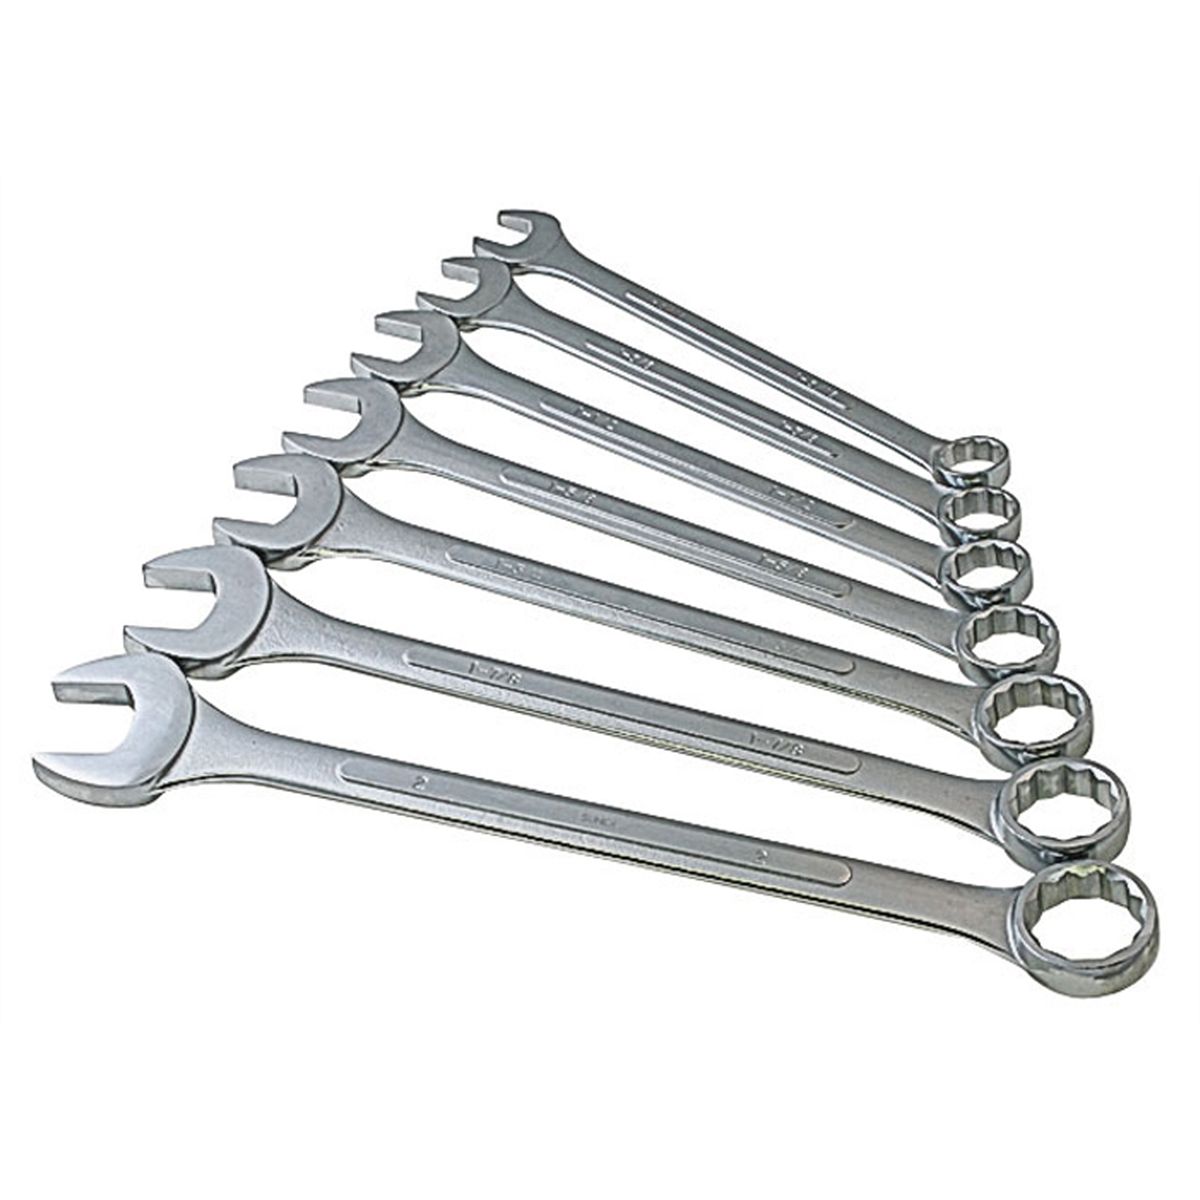 Wright Tool D980 Metric Combination Wrenches Full Polish 